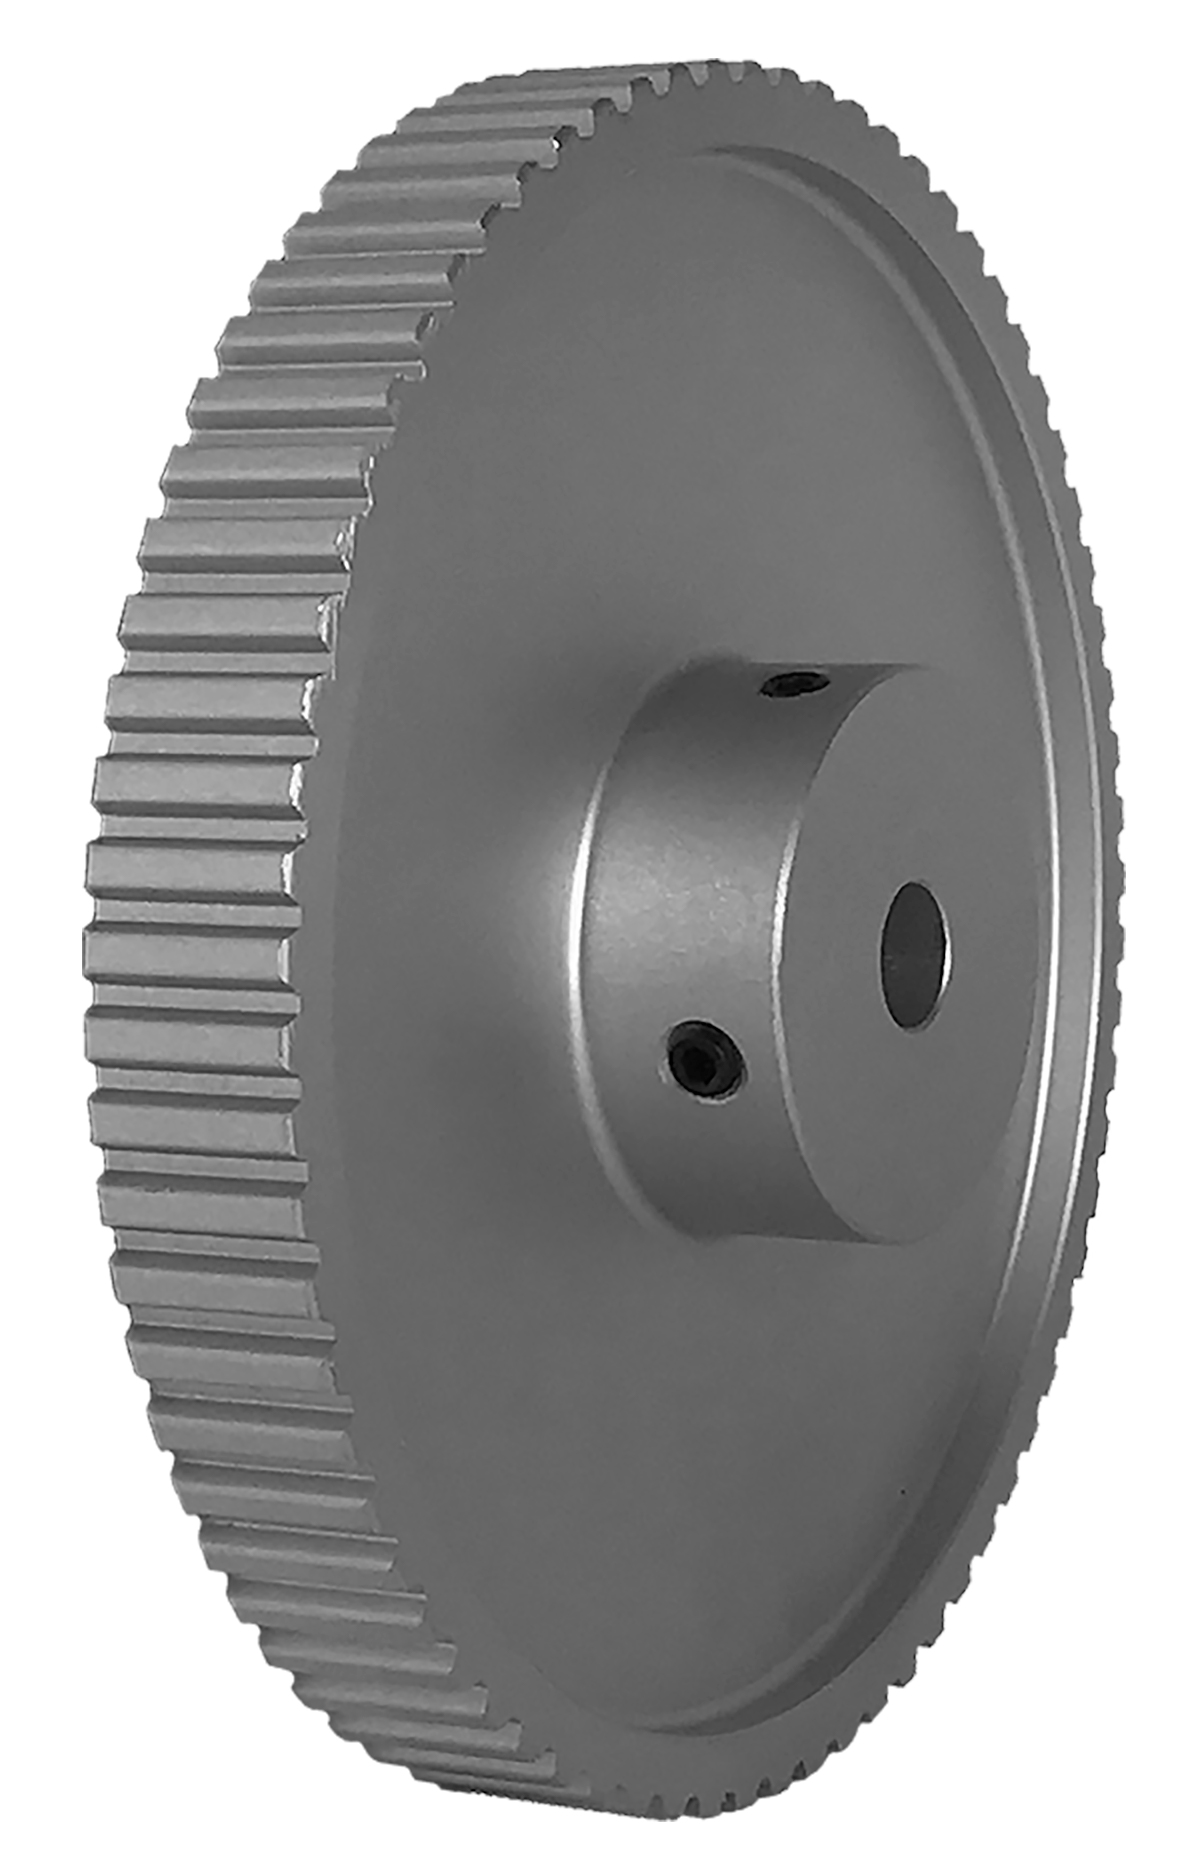 72XL037-6WA5 - Aluminum Imperial Pitch Pulleys